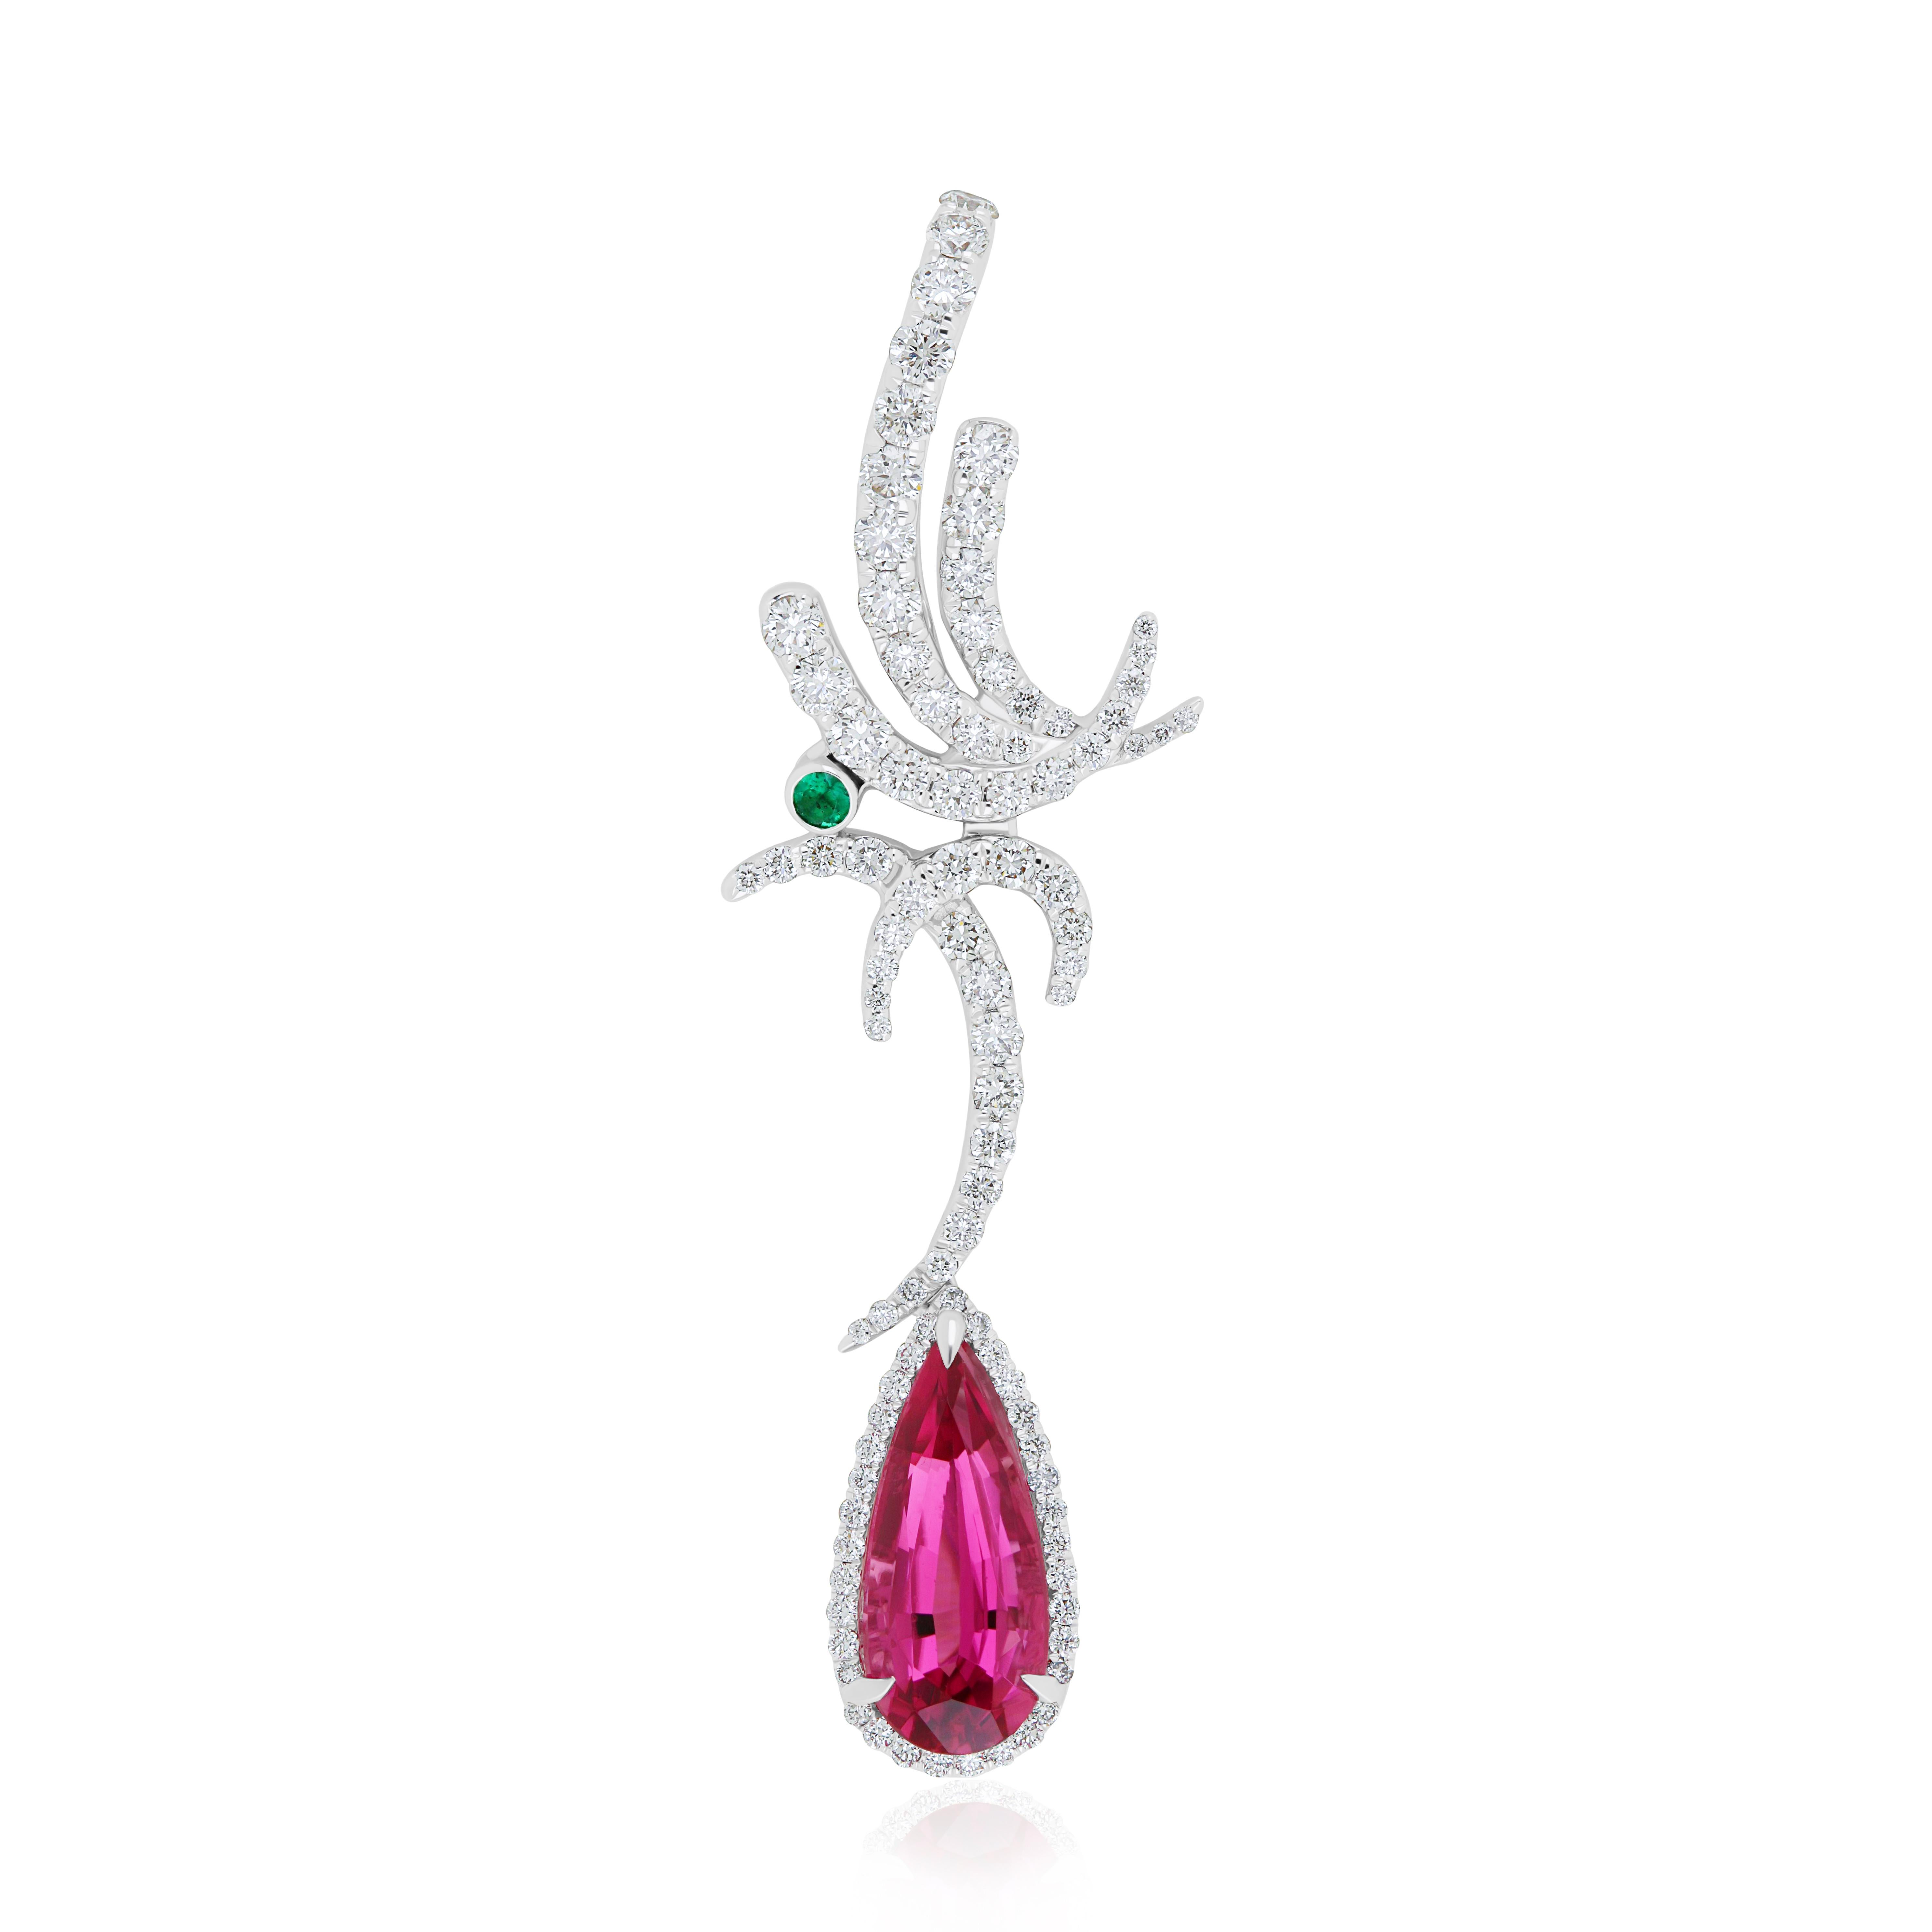 Crafted with precision and sophistication, this gold pendant boasts a captivating 1.5 carat (approximately) pear-shaped rubellite, complemented by vivid green emeralds to amplify its allure. Enhanced with micro pave-set diamonds weighing